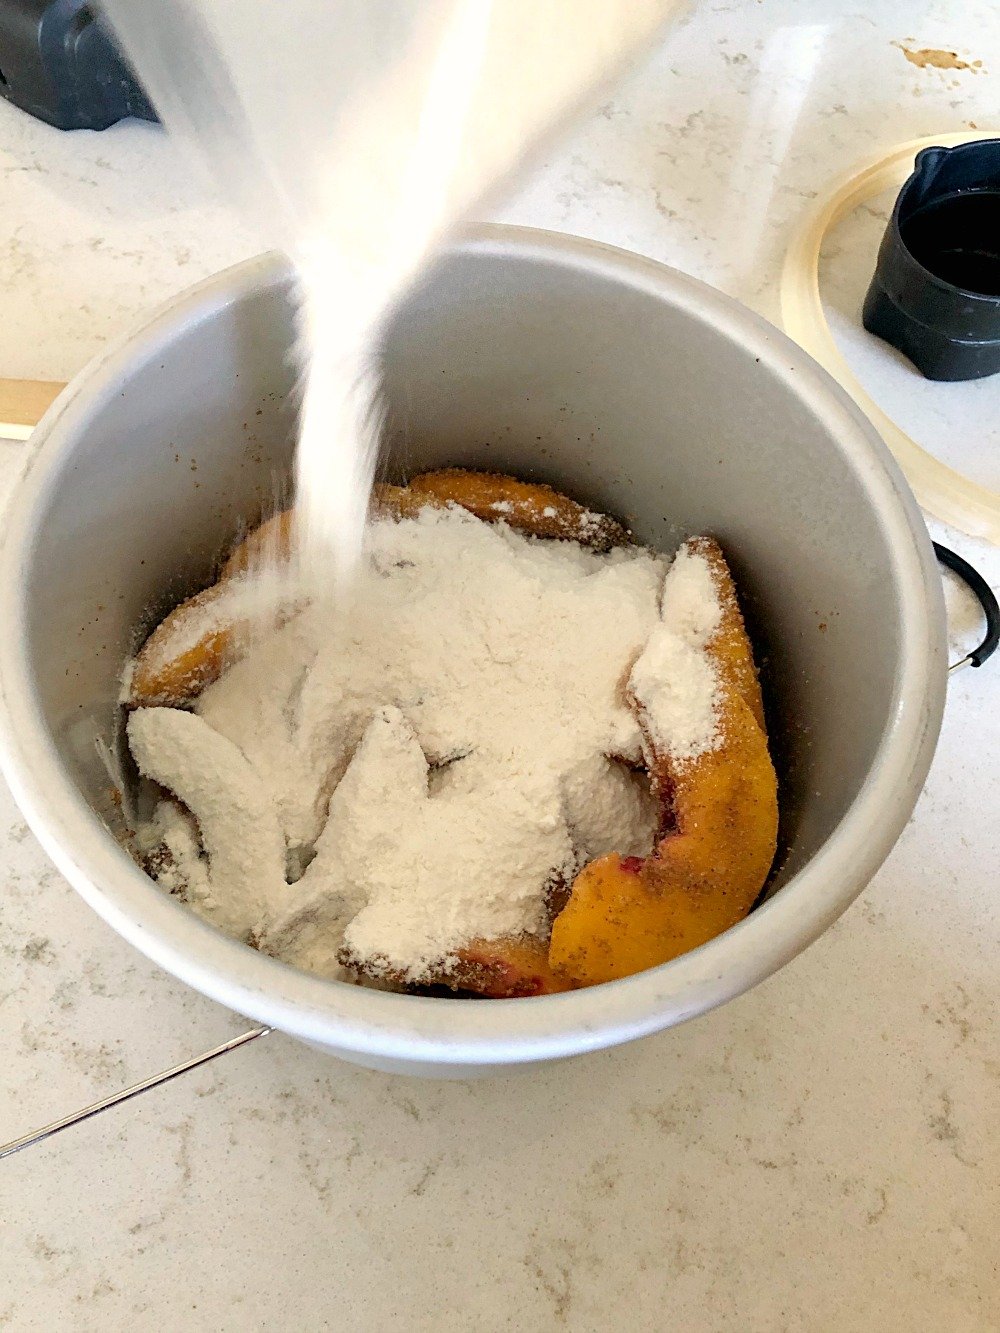 Pouring yellow cake mix over peaches in instant pot